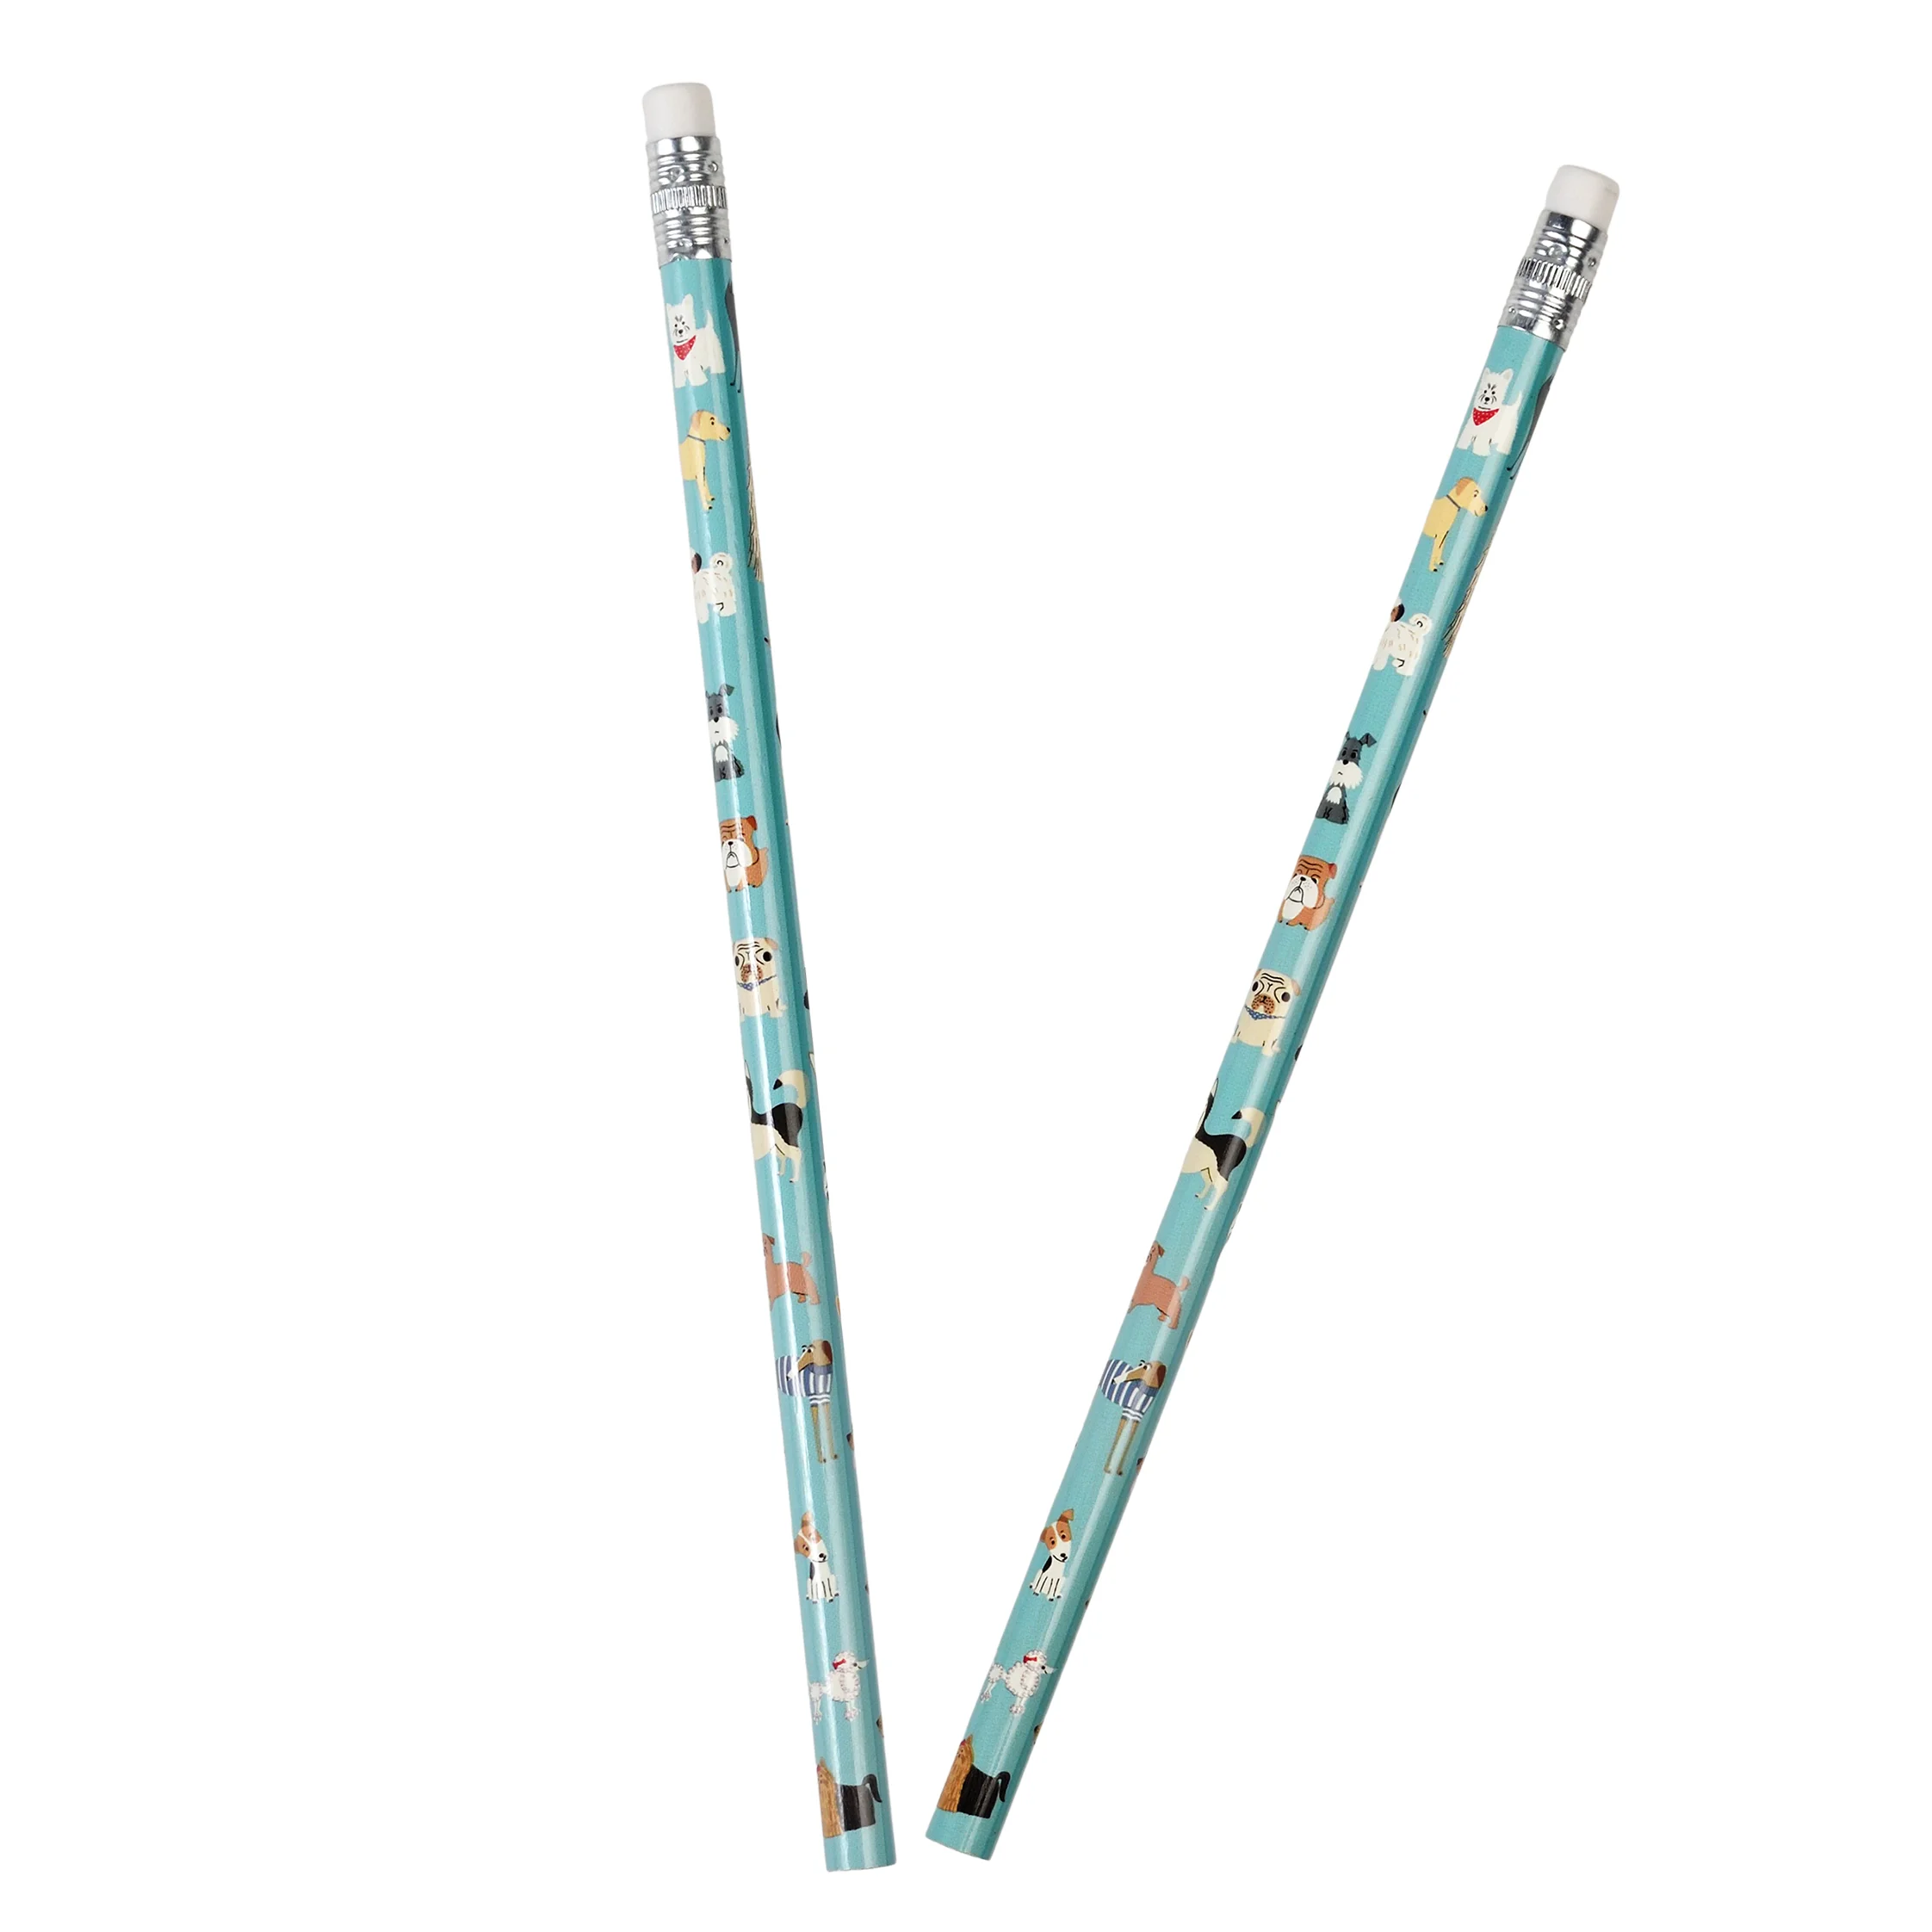 hb pencils (pack of 6) - best in show